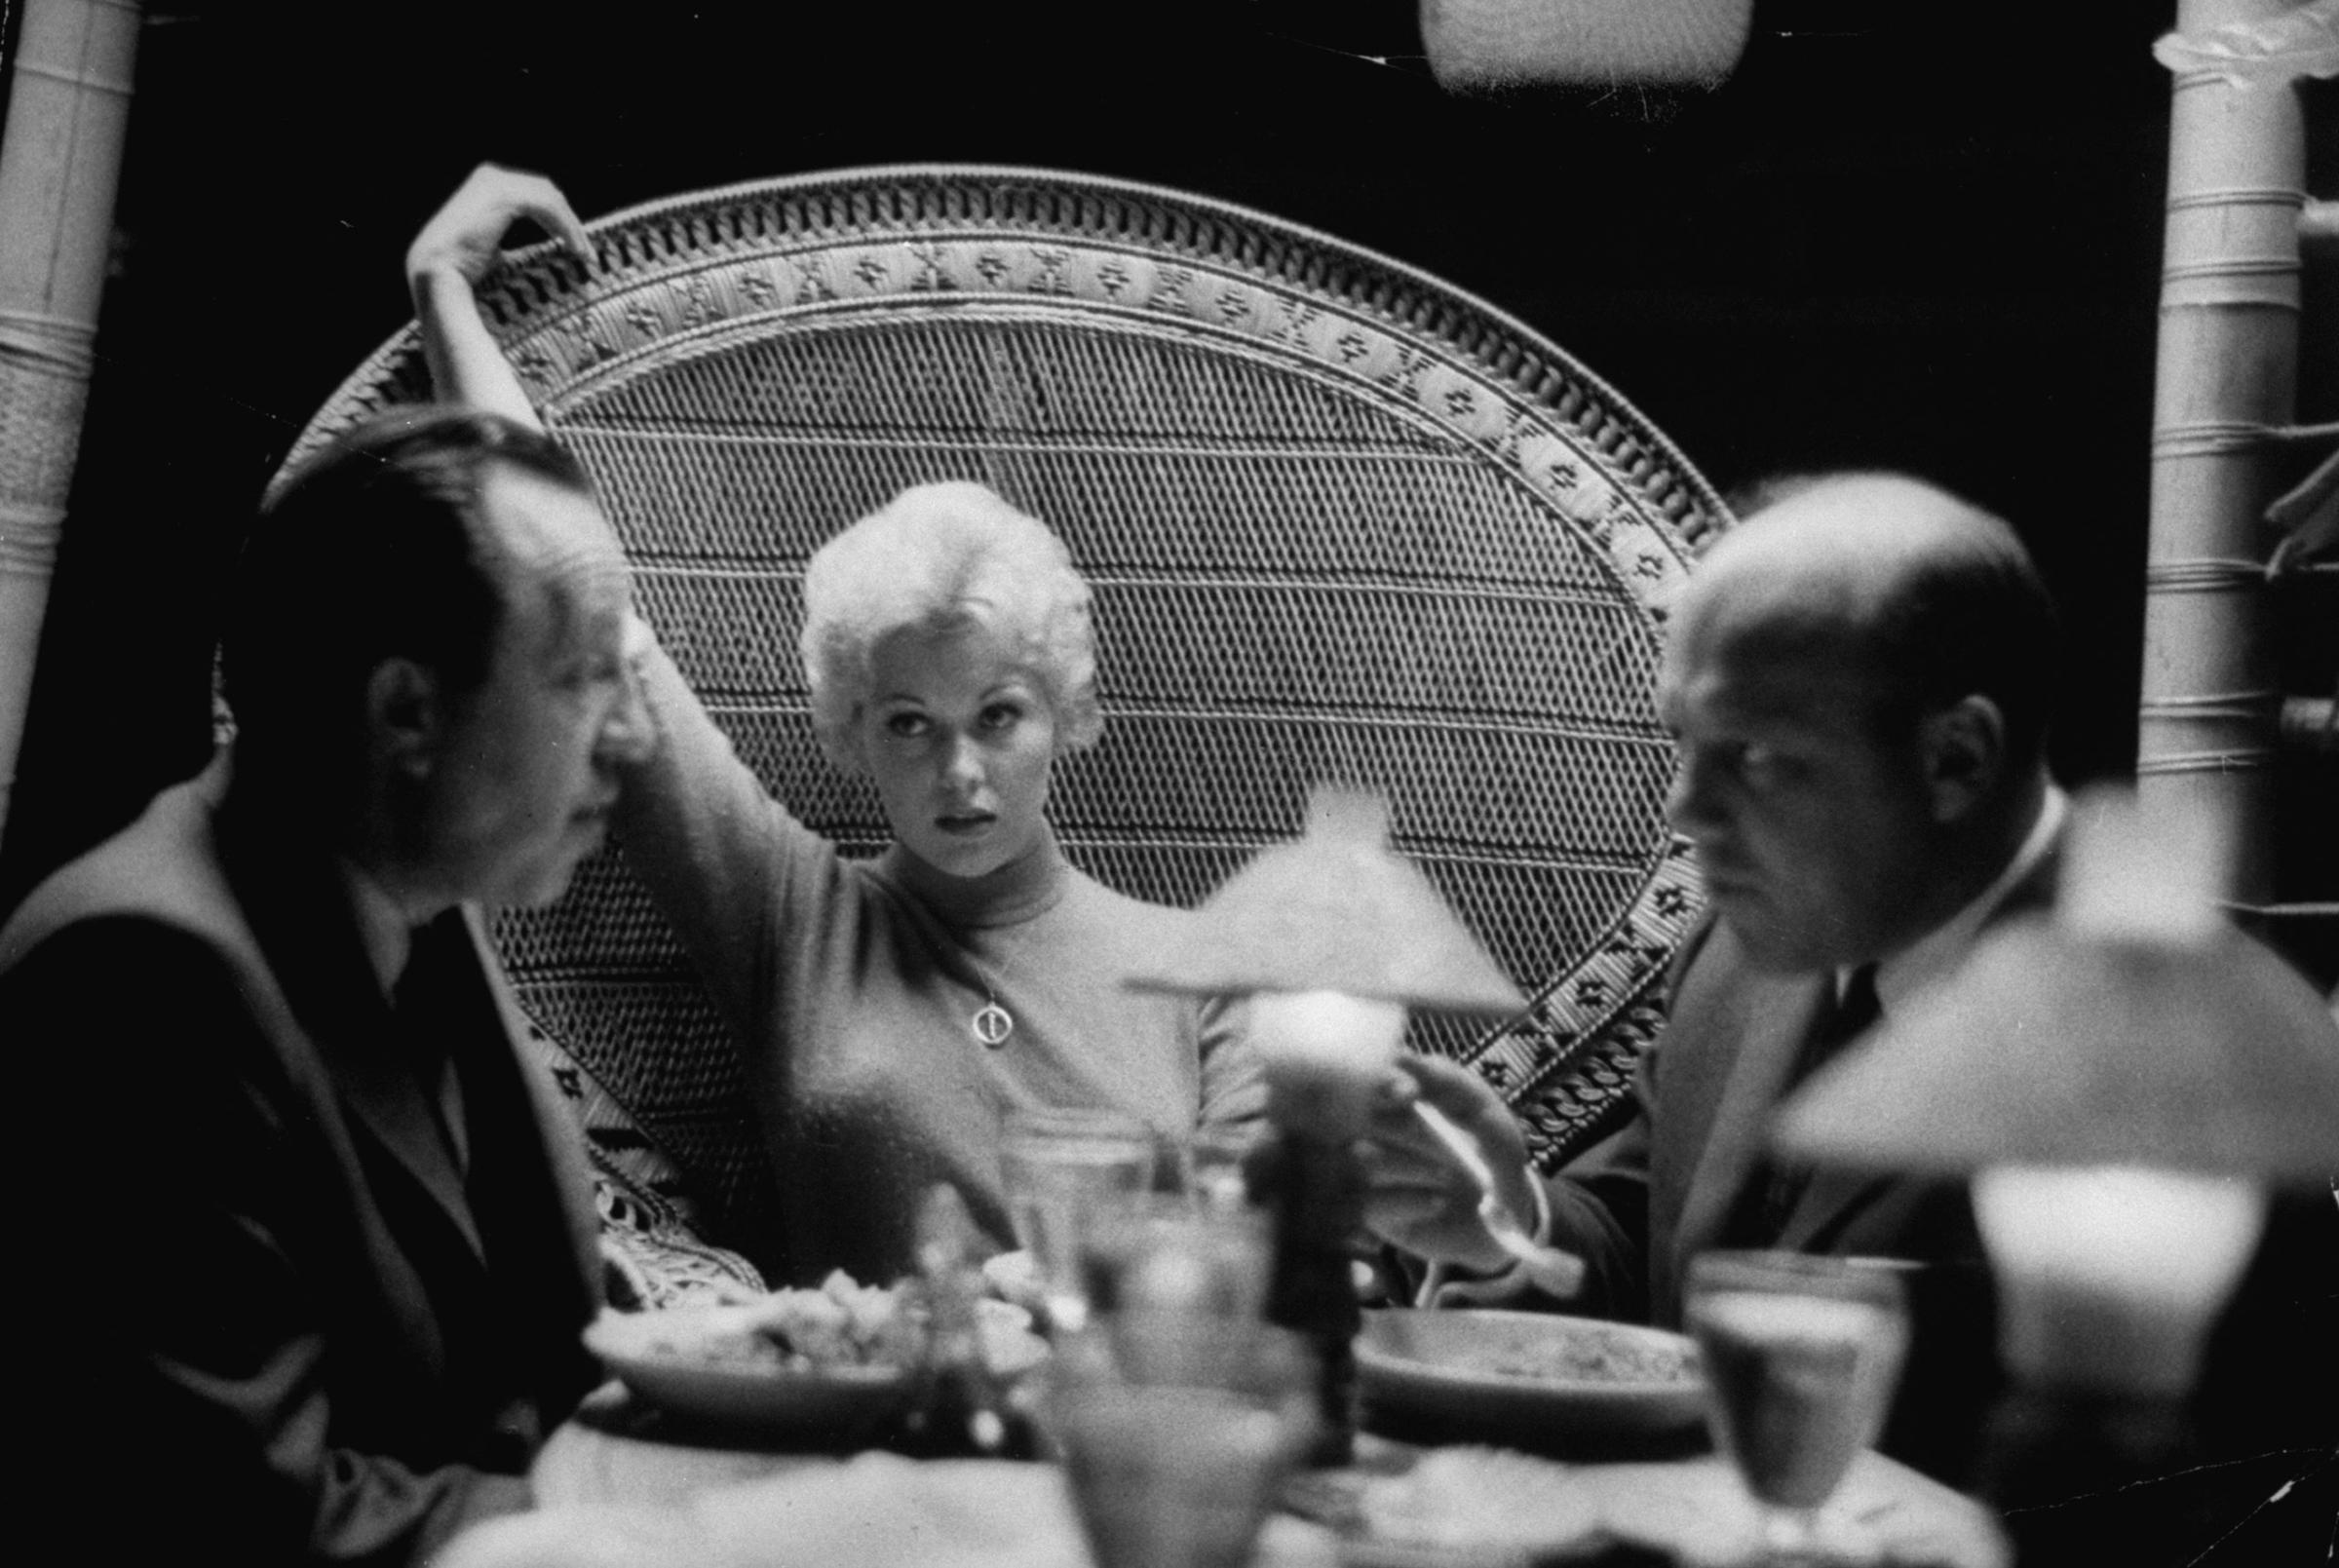 In a Beverly Hills Restaurant Kim Novak sits with a faraway look as agents Al and Wilt Melnick hotly discuss her blossoming movie career.